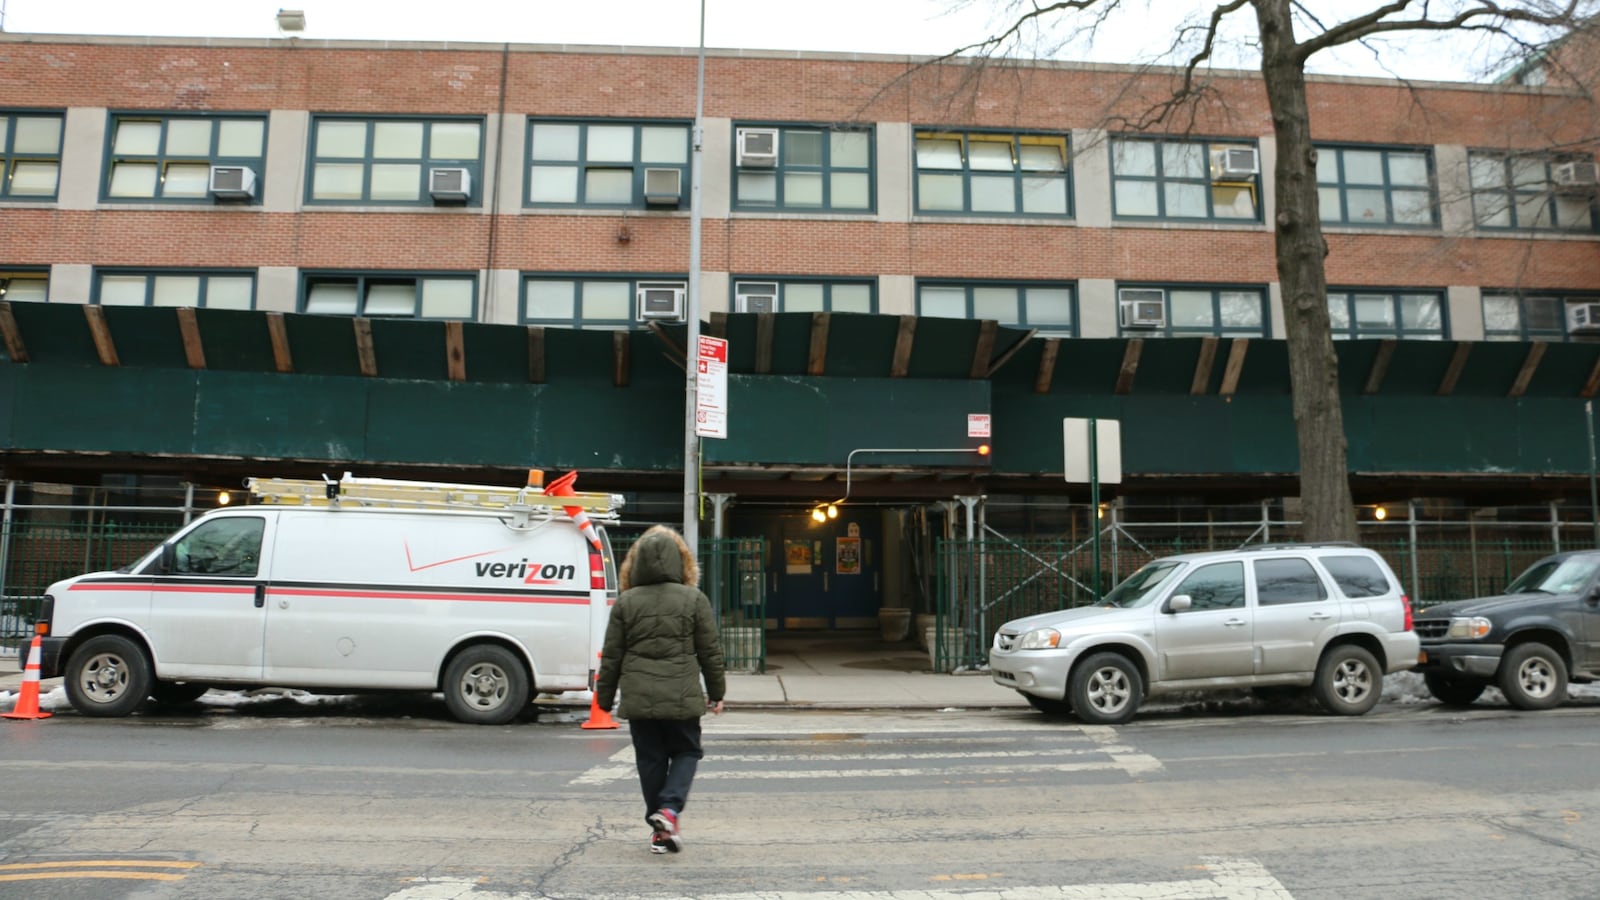 Satellite West Middle School shares a building with P.S. 307 in Vinegar Hill, Brooklyn. The middle school is set to move into a new high-rise in nearby Dumbo this fall.